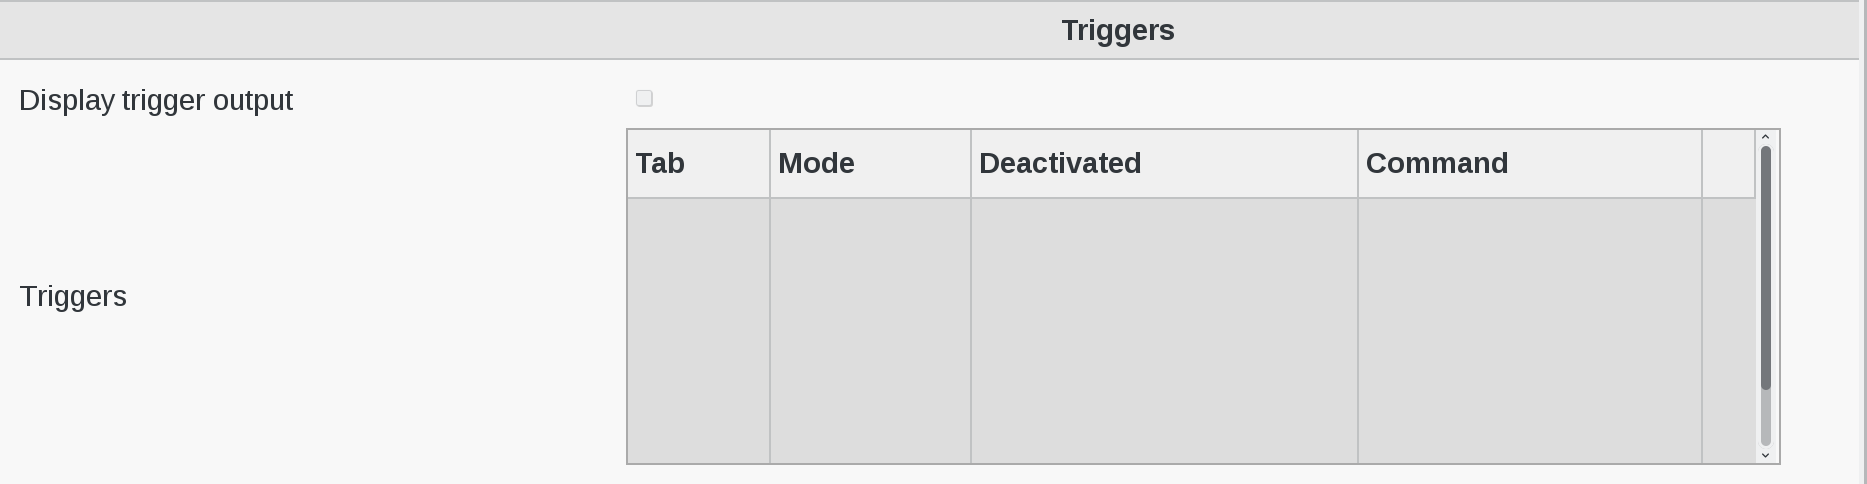 Image of Triggers menu in FusionDirectory